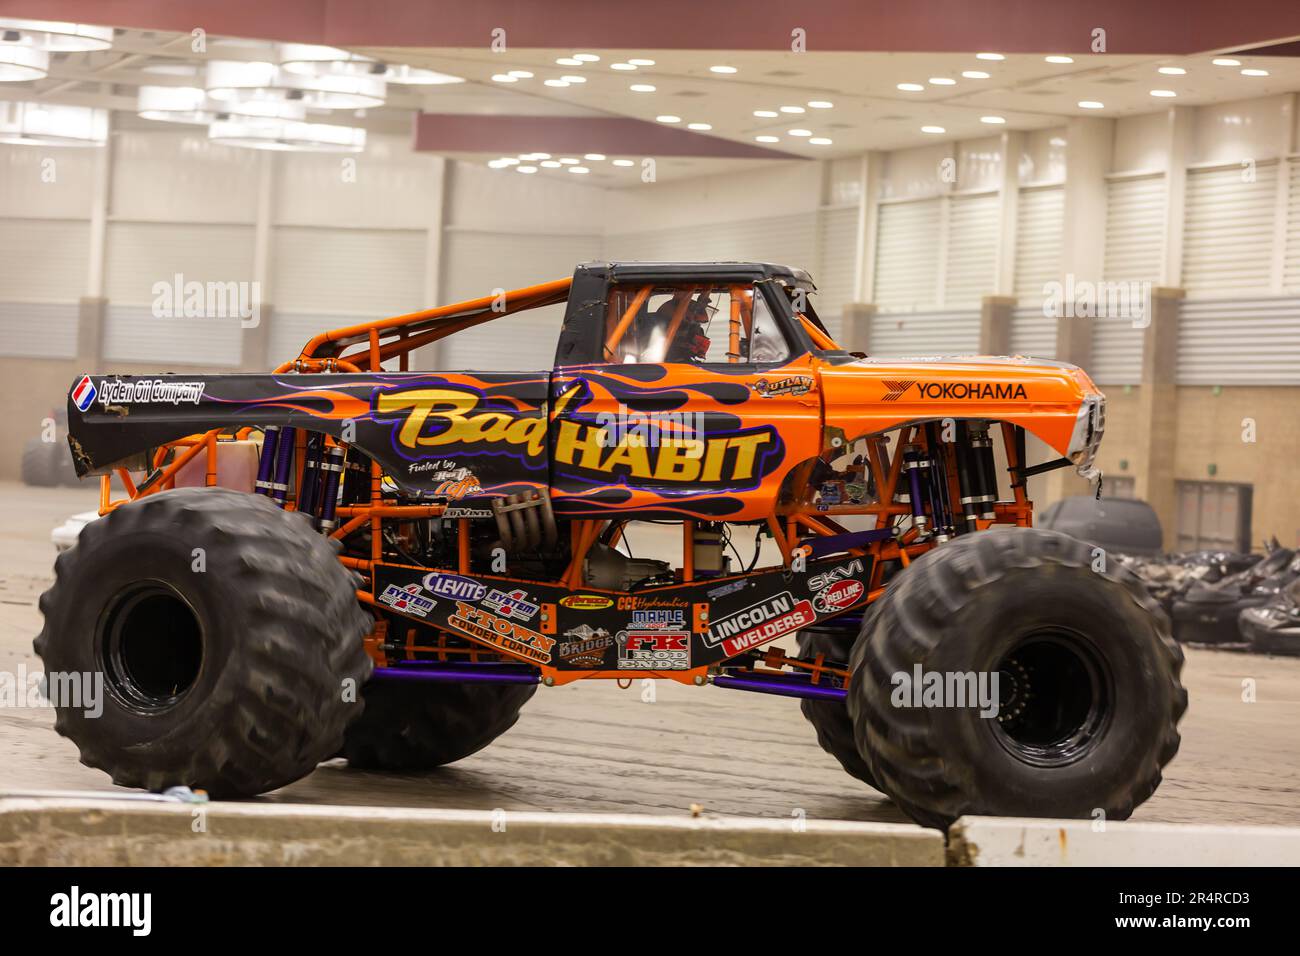 The monster truck 'Bad Habit,' a 1979 Ford F-250, performs at the Allen County War Memorial Coliseum Expo Center in Fort Wayne, Indiana, USA. Stock Photo